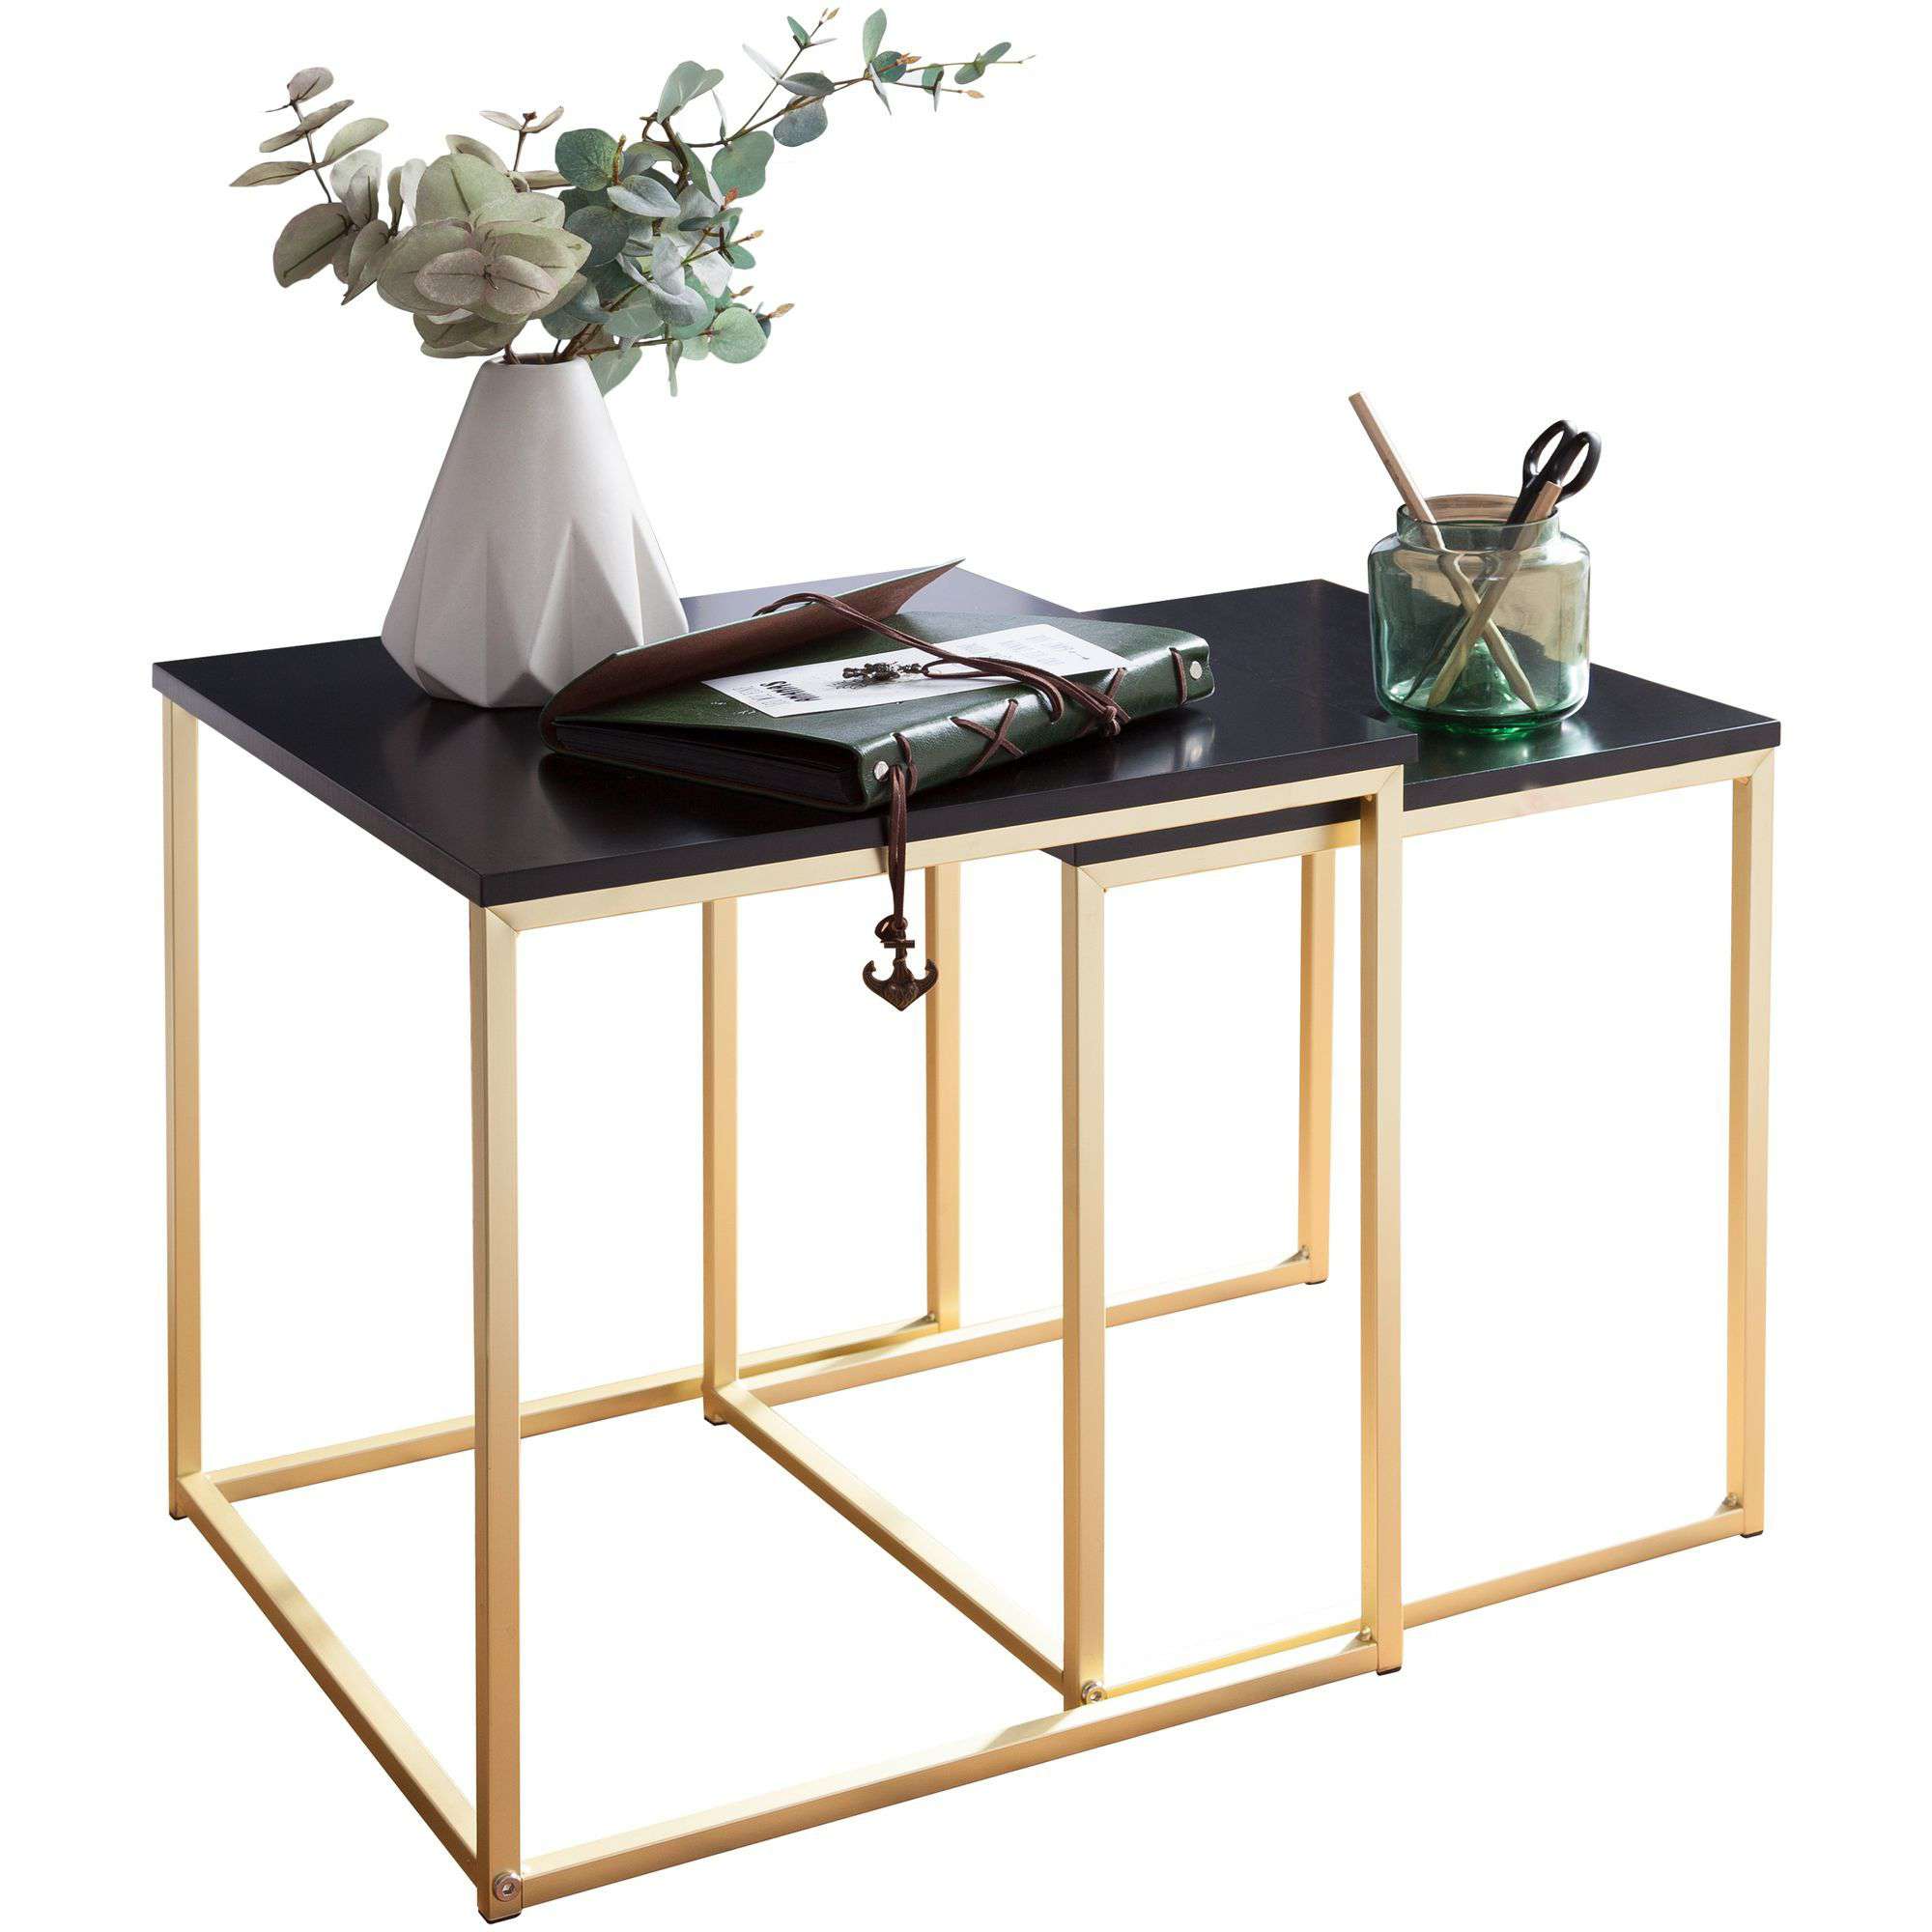 Nancy's Truro Modern Side Tables - Set of 2 - Side Table - Table - Coffee Tables